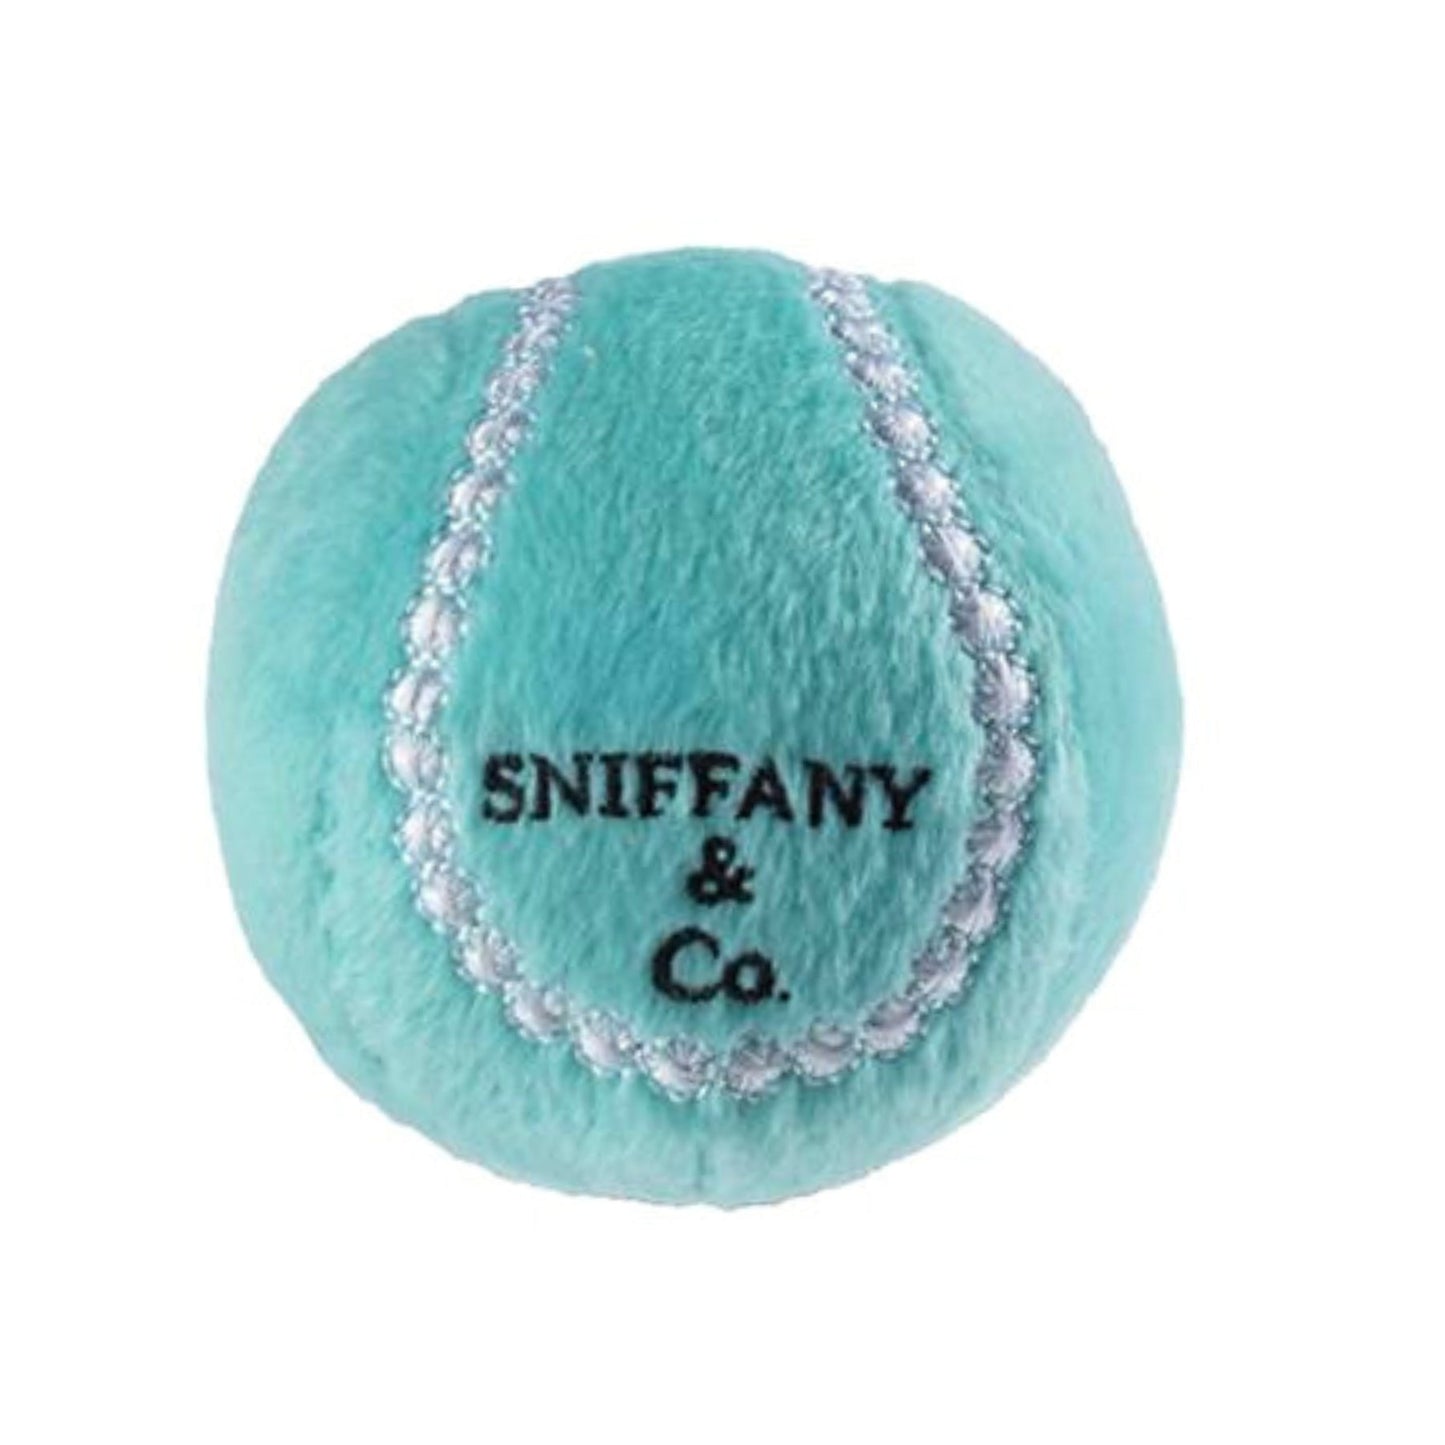 Sniffany & Co Tennis Ball - Pooch Luxury